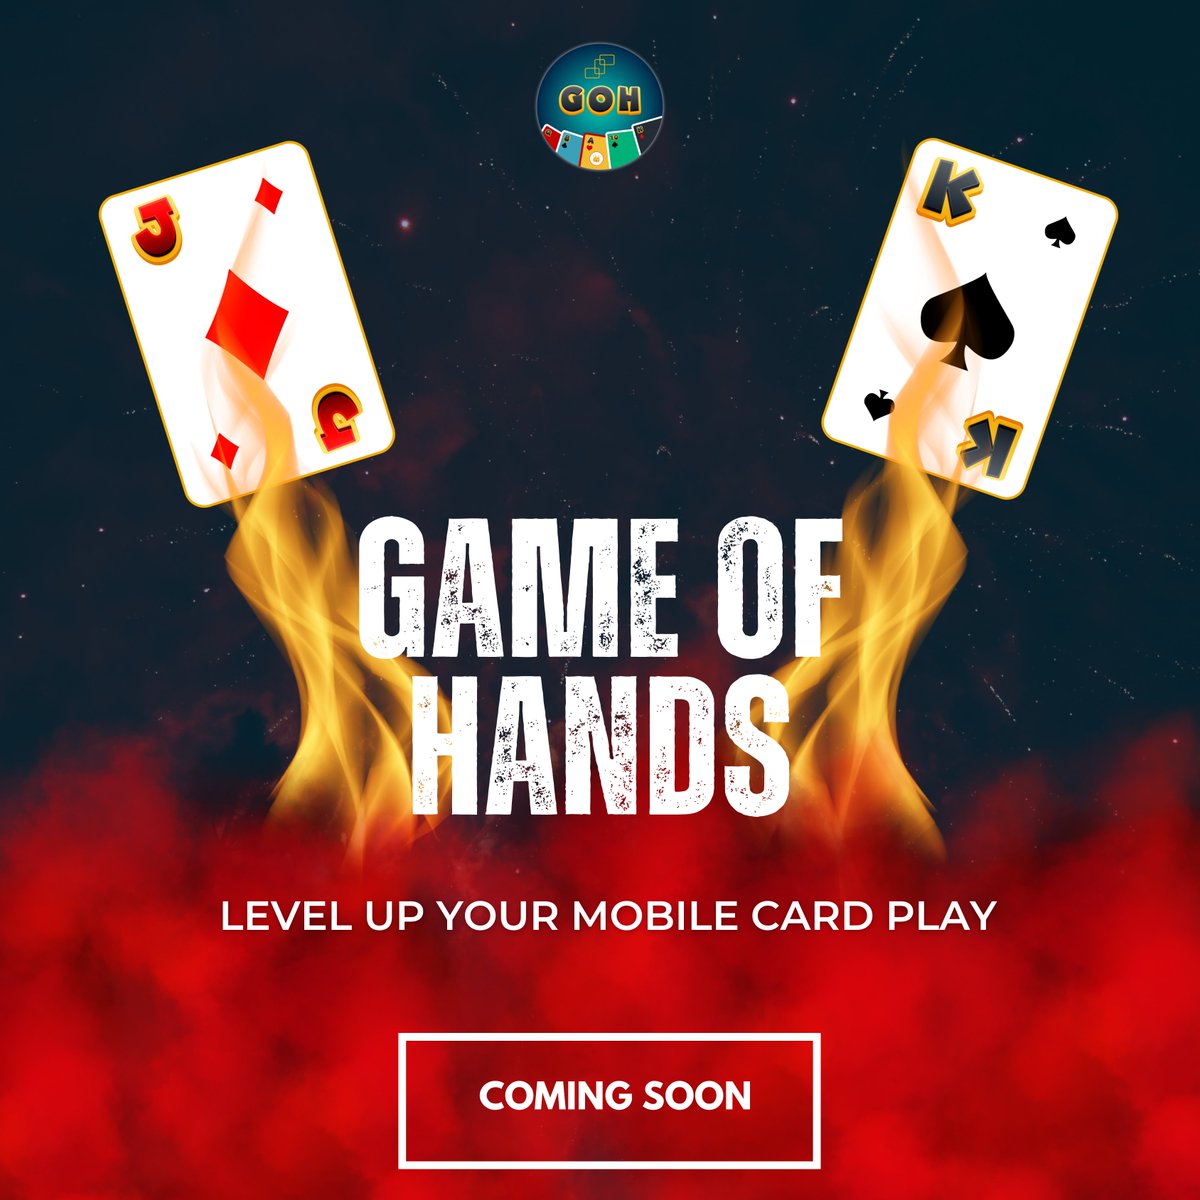 Get ready to elevate your gaming experience! 🃏✨ Join us as we unveil the future of mobile card gaming.
.
#mobilegames #CardGame #freeplaywin #CardGameFun #ComingSoon #GetReady #cardgaming #cardgames #playingcards #gamingcommunity #launchingsoon